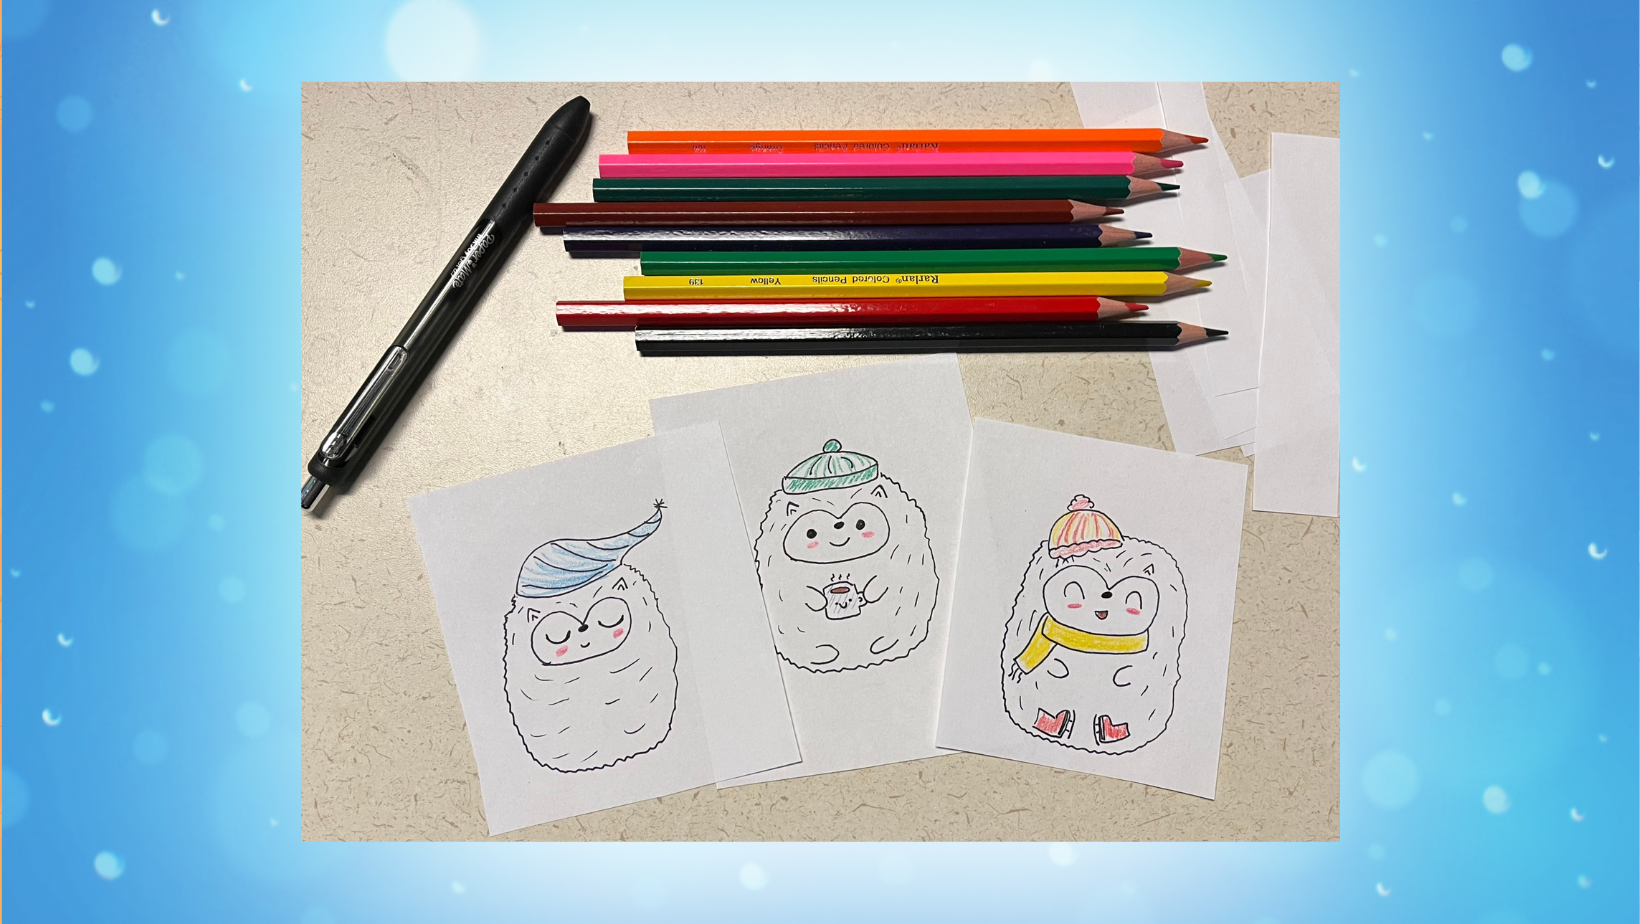 3 Yeti doodles, with a pen and colored pencils